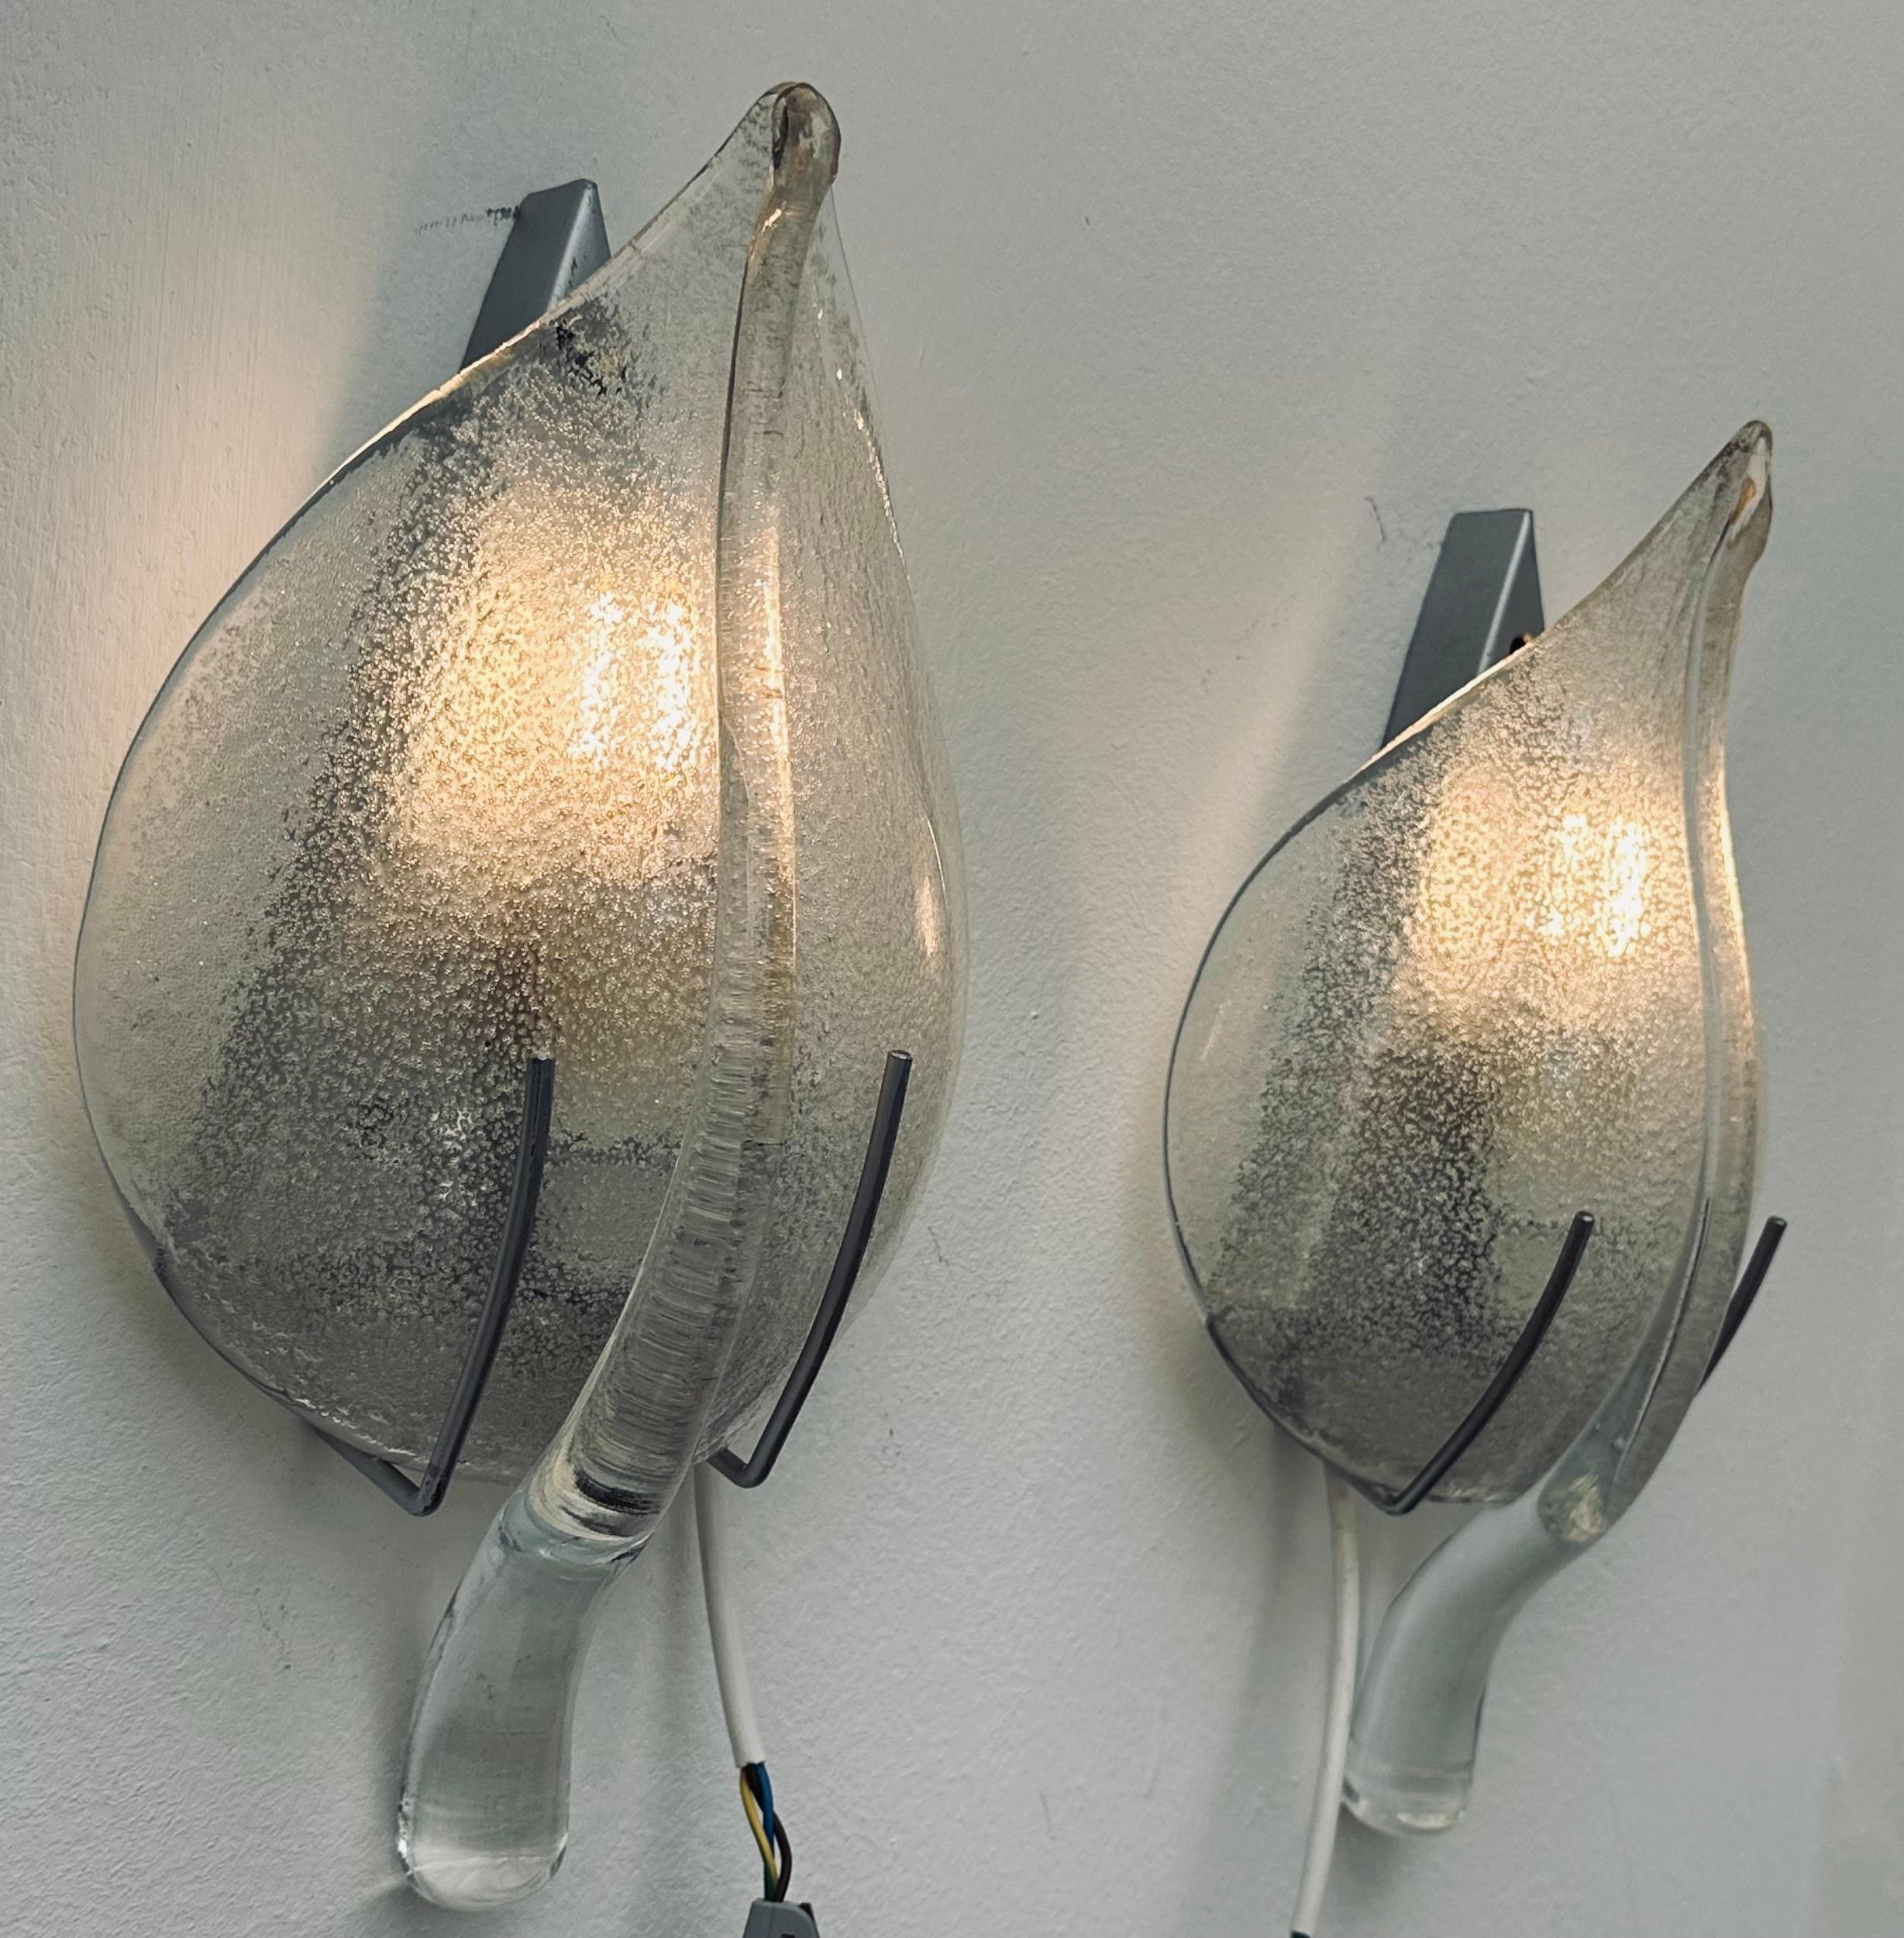 Pair of 1970s vintage Italian Murano glass wall sconces or lights in the style of Franco Luce or Sölken Leuchten. The transparent mottled leaf has a protruding vein running down the centre and a stem at the bottom which holds it in place. The glass